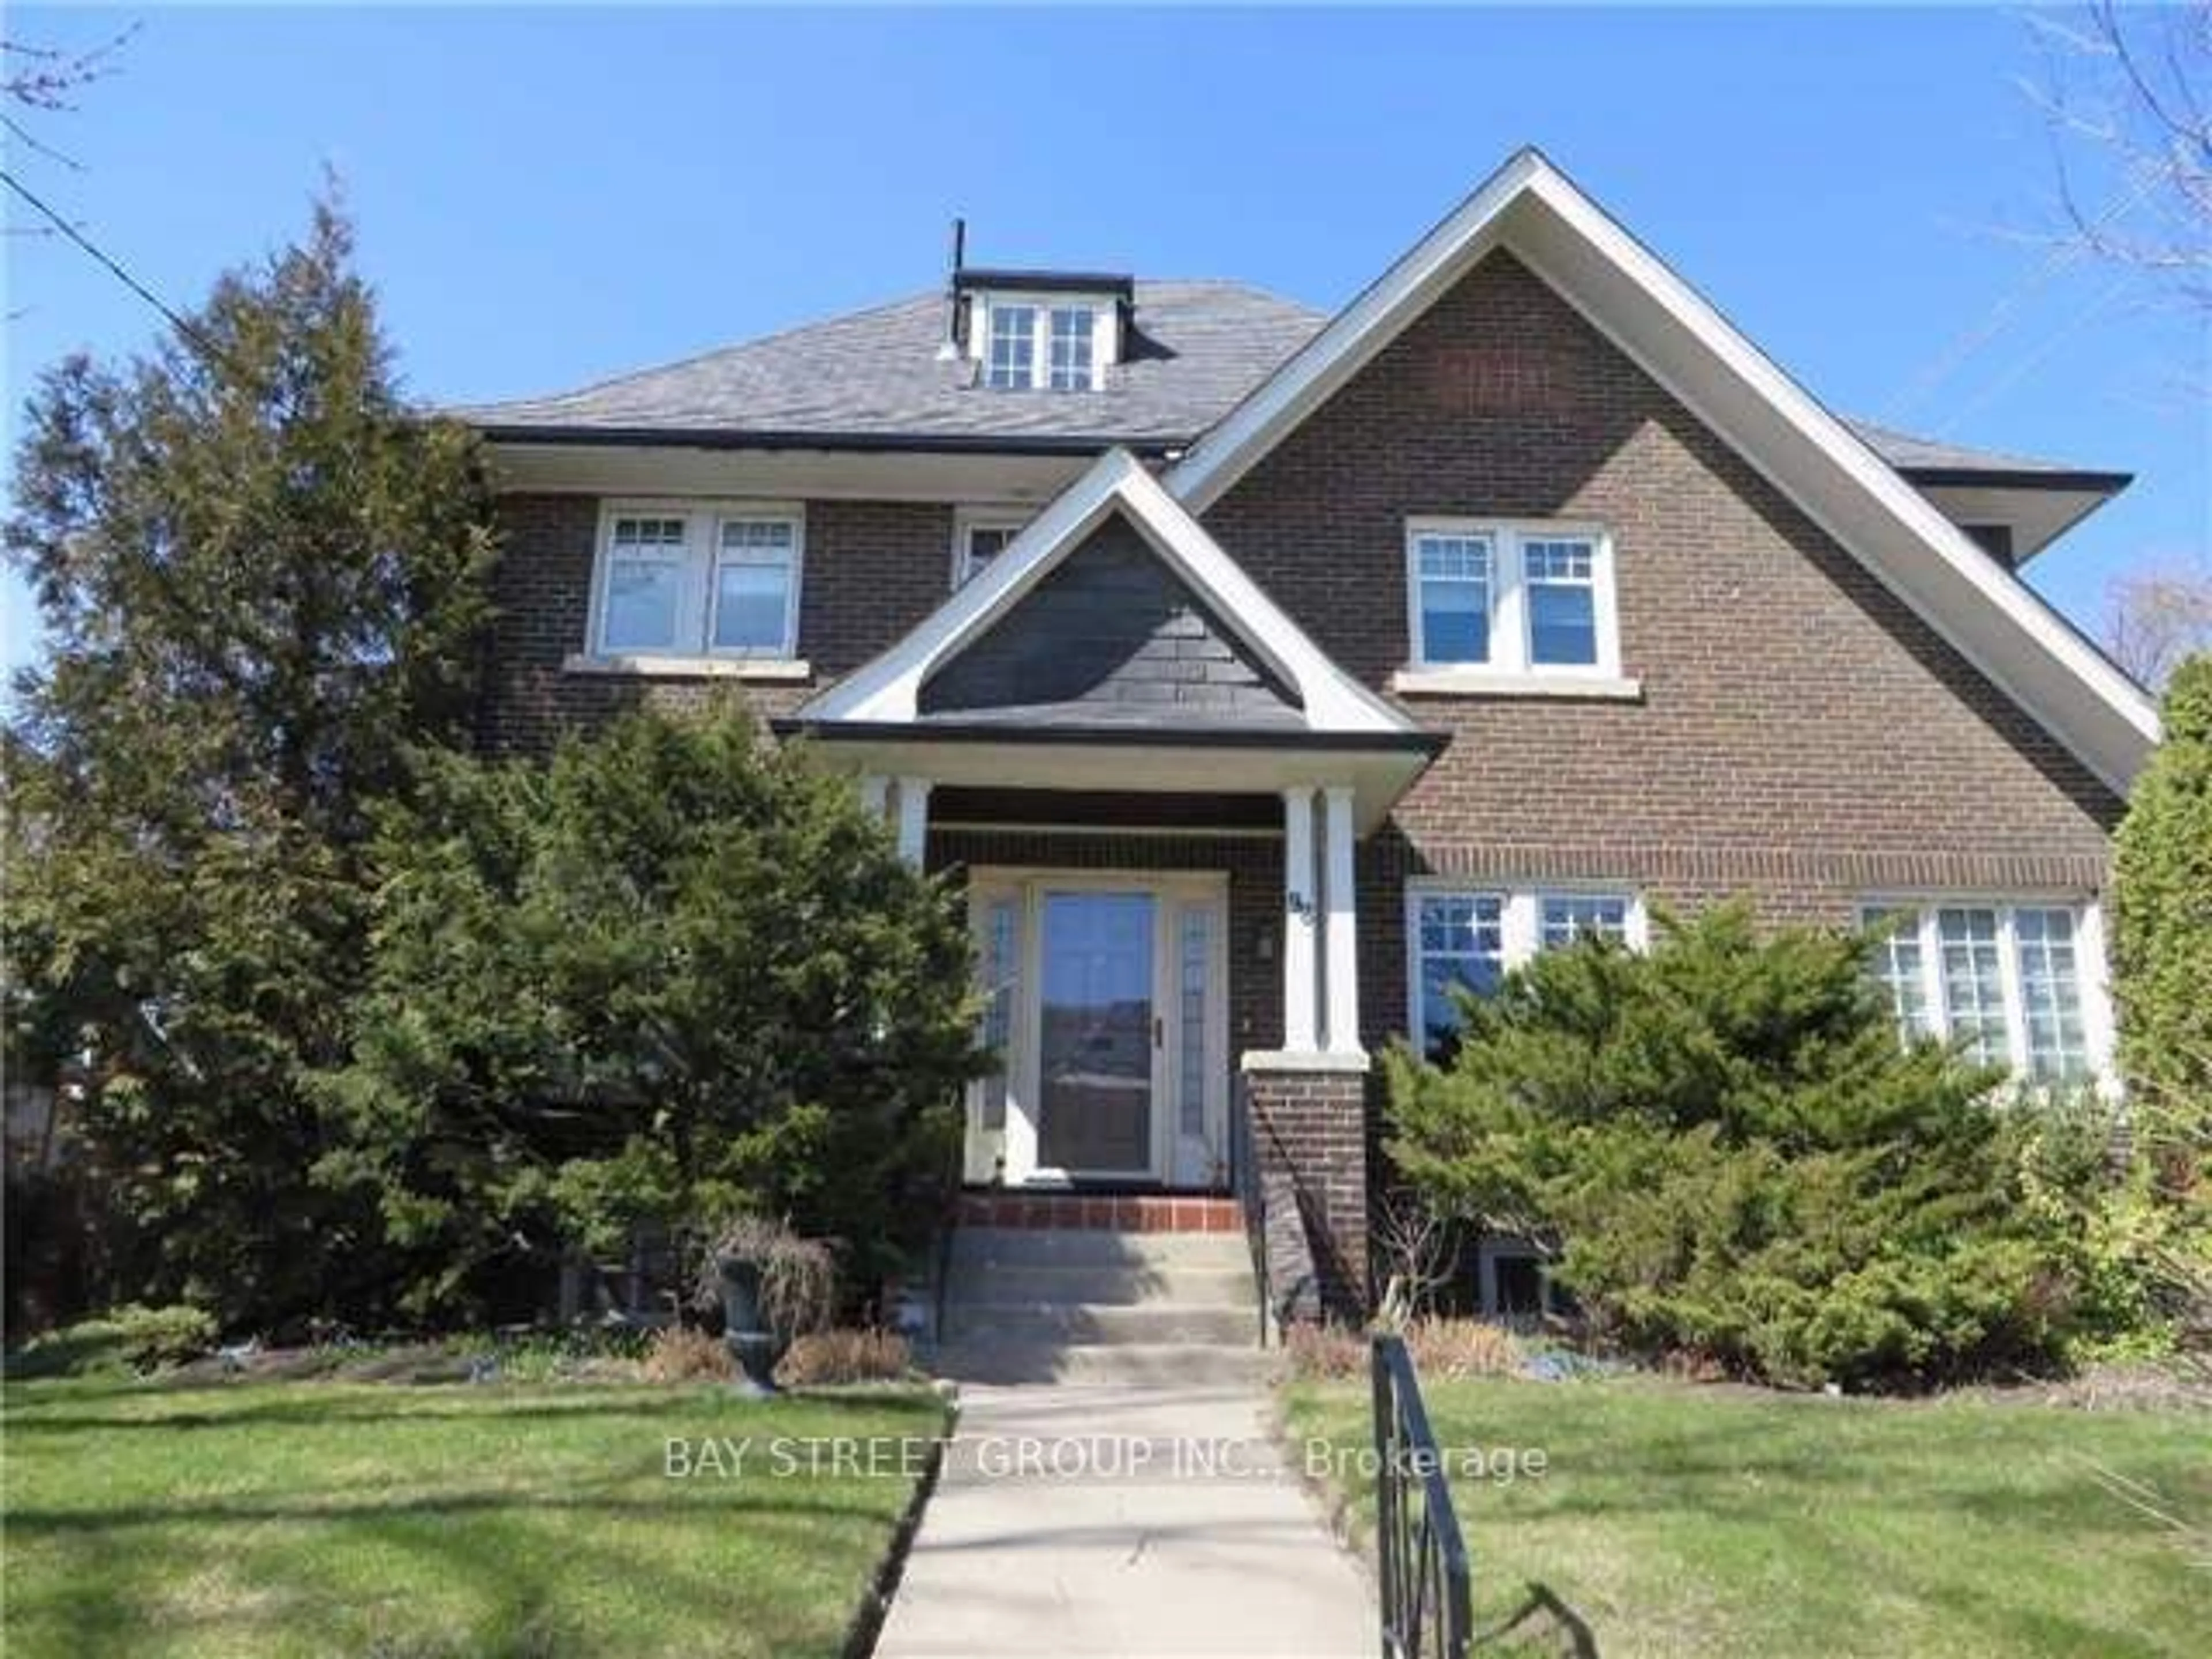 Home with brick exterior material for 98 Dawlish Ave, Toronto Ontario M4N 1H1